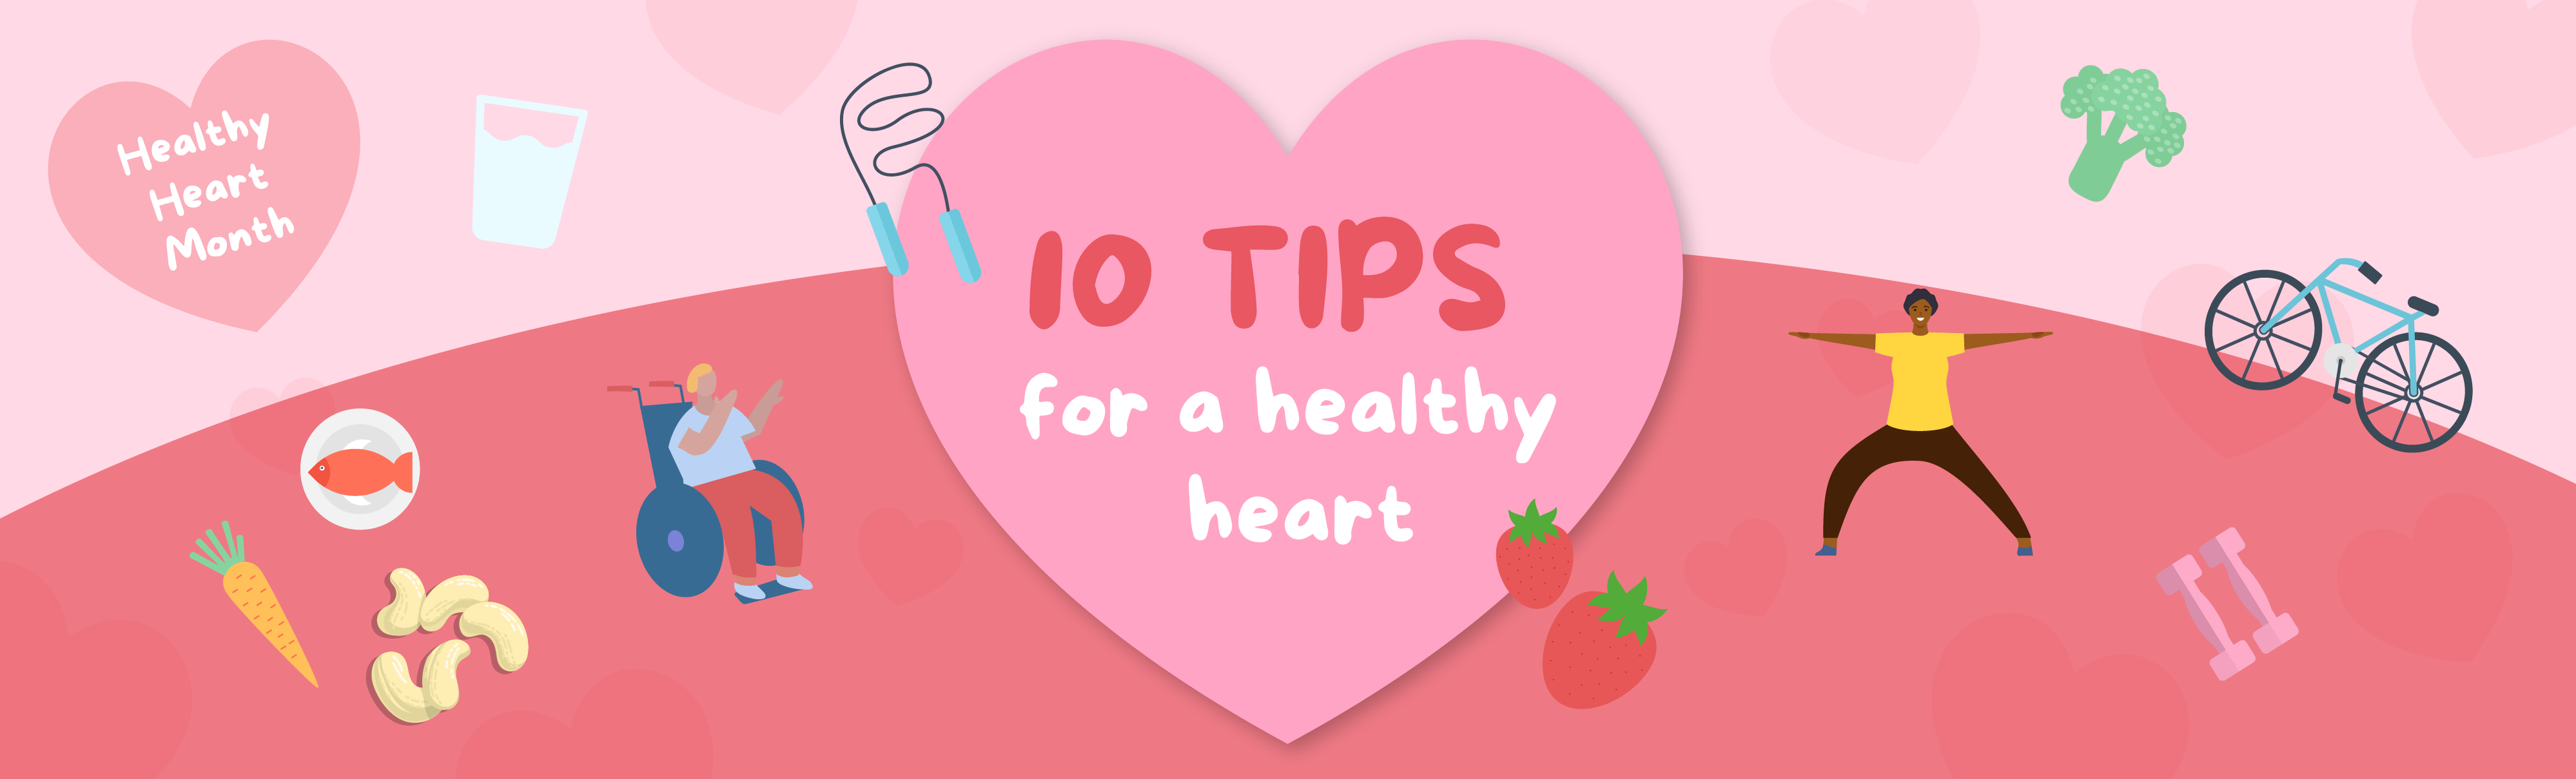 Top 10 Tips for a Healthy Heart